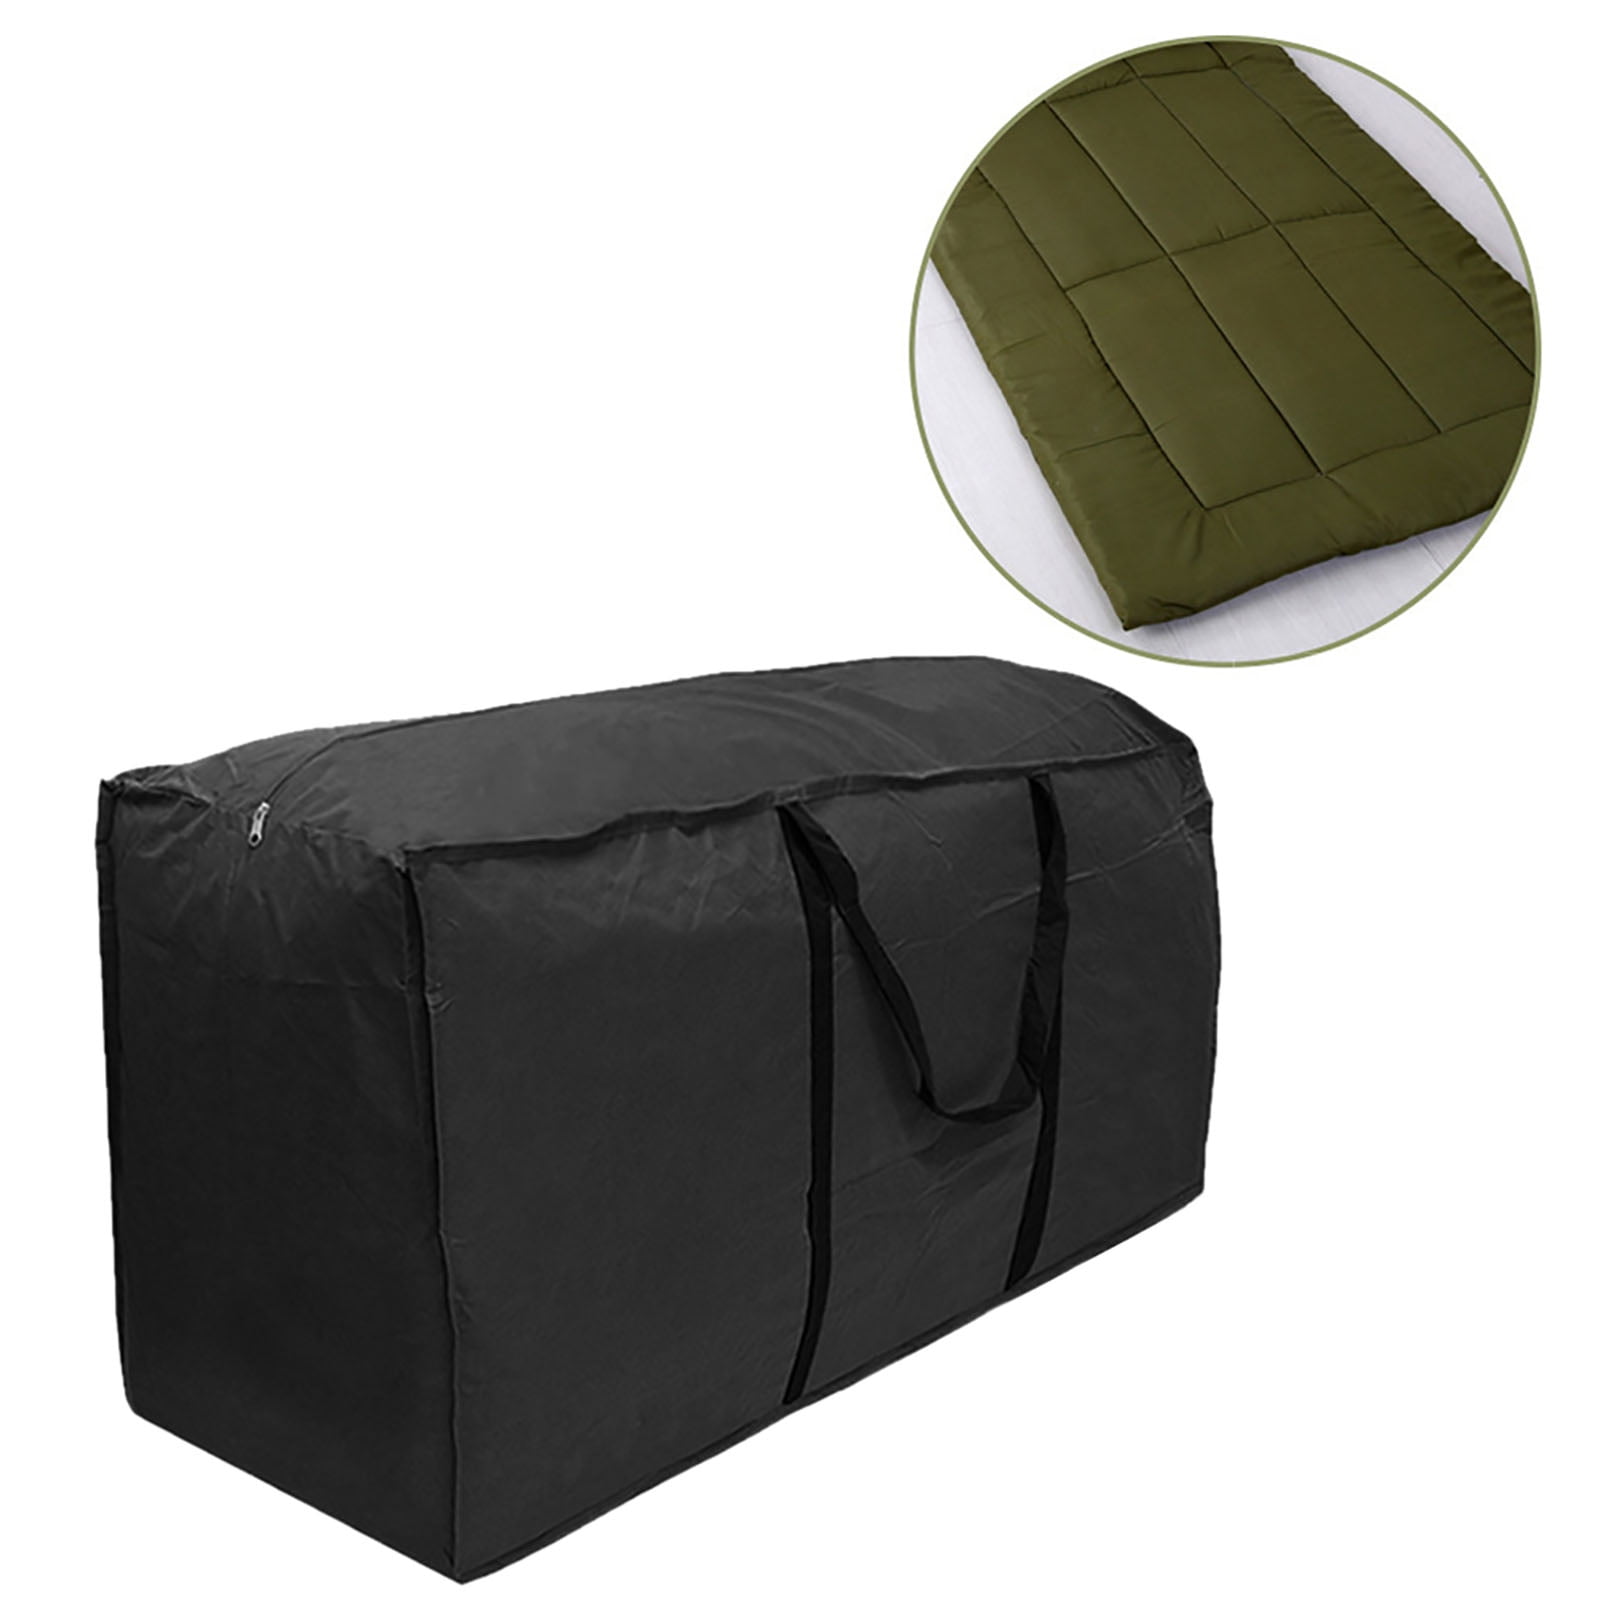 Outdoor Garden Furniture Tent Cushion Storage Bag Pouch Waterproof Case Cover US 